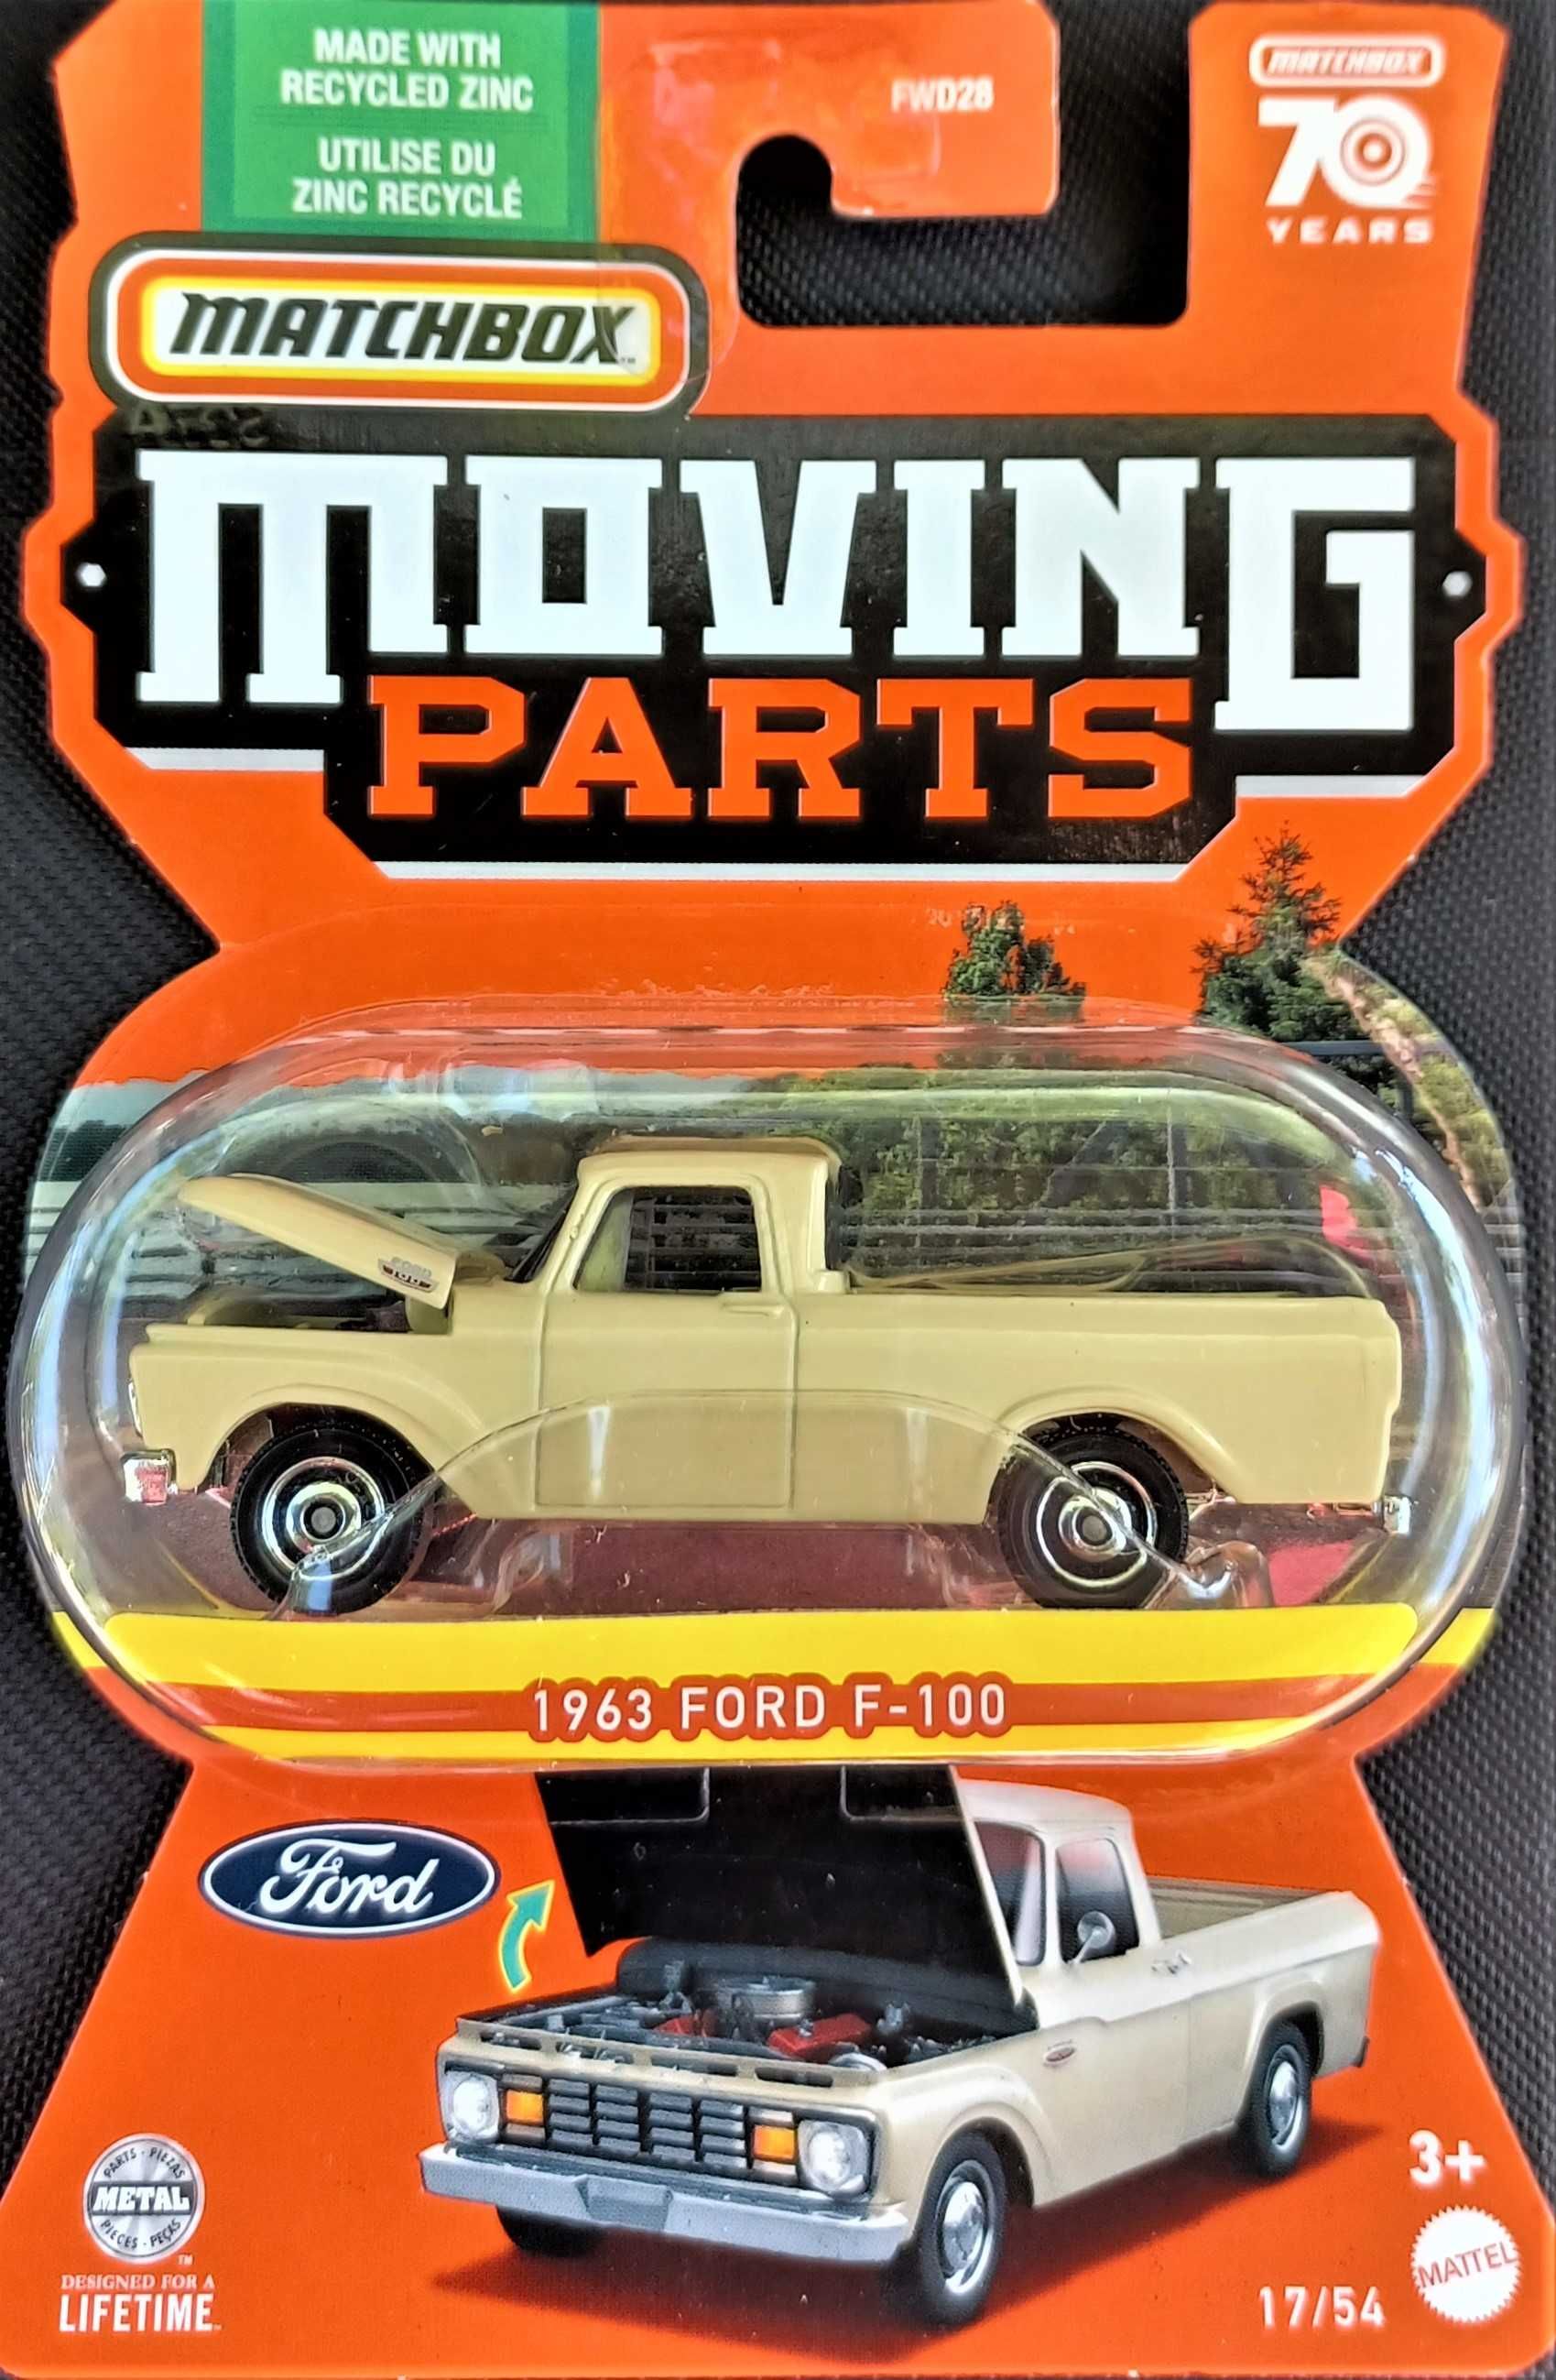 Matchbox 1963 Ford F-100 Moving Parts